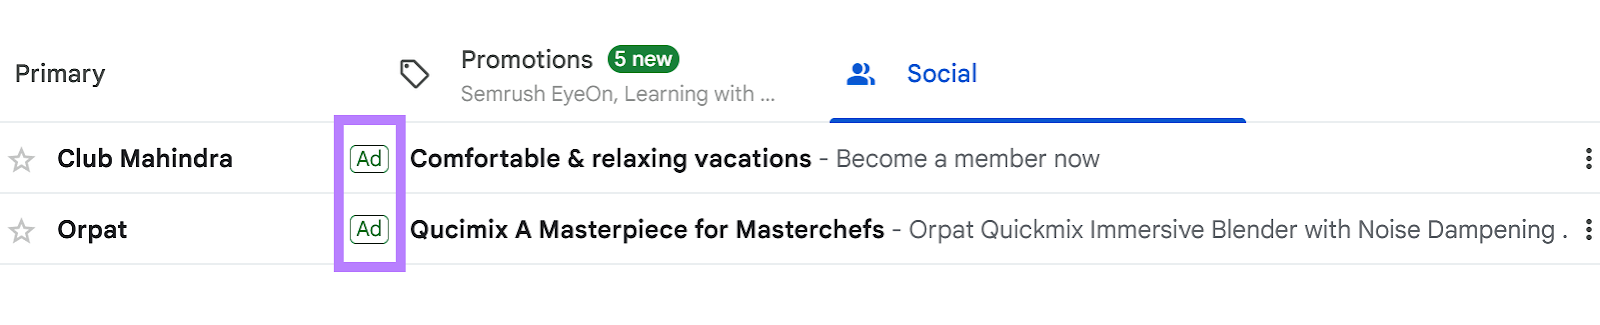 Gmail ads shown successful  the inbox with "Ad" labels